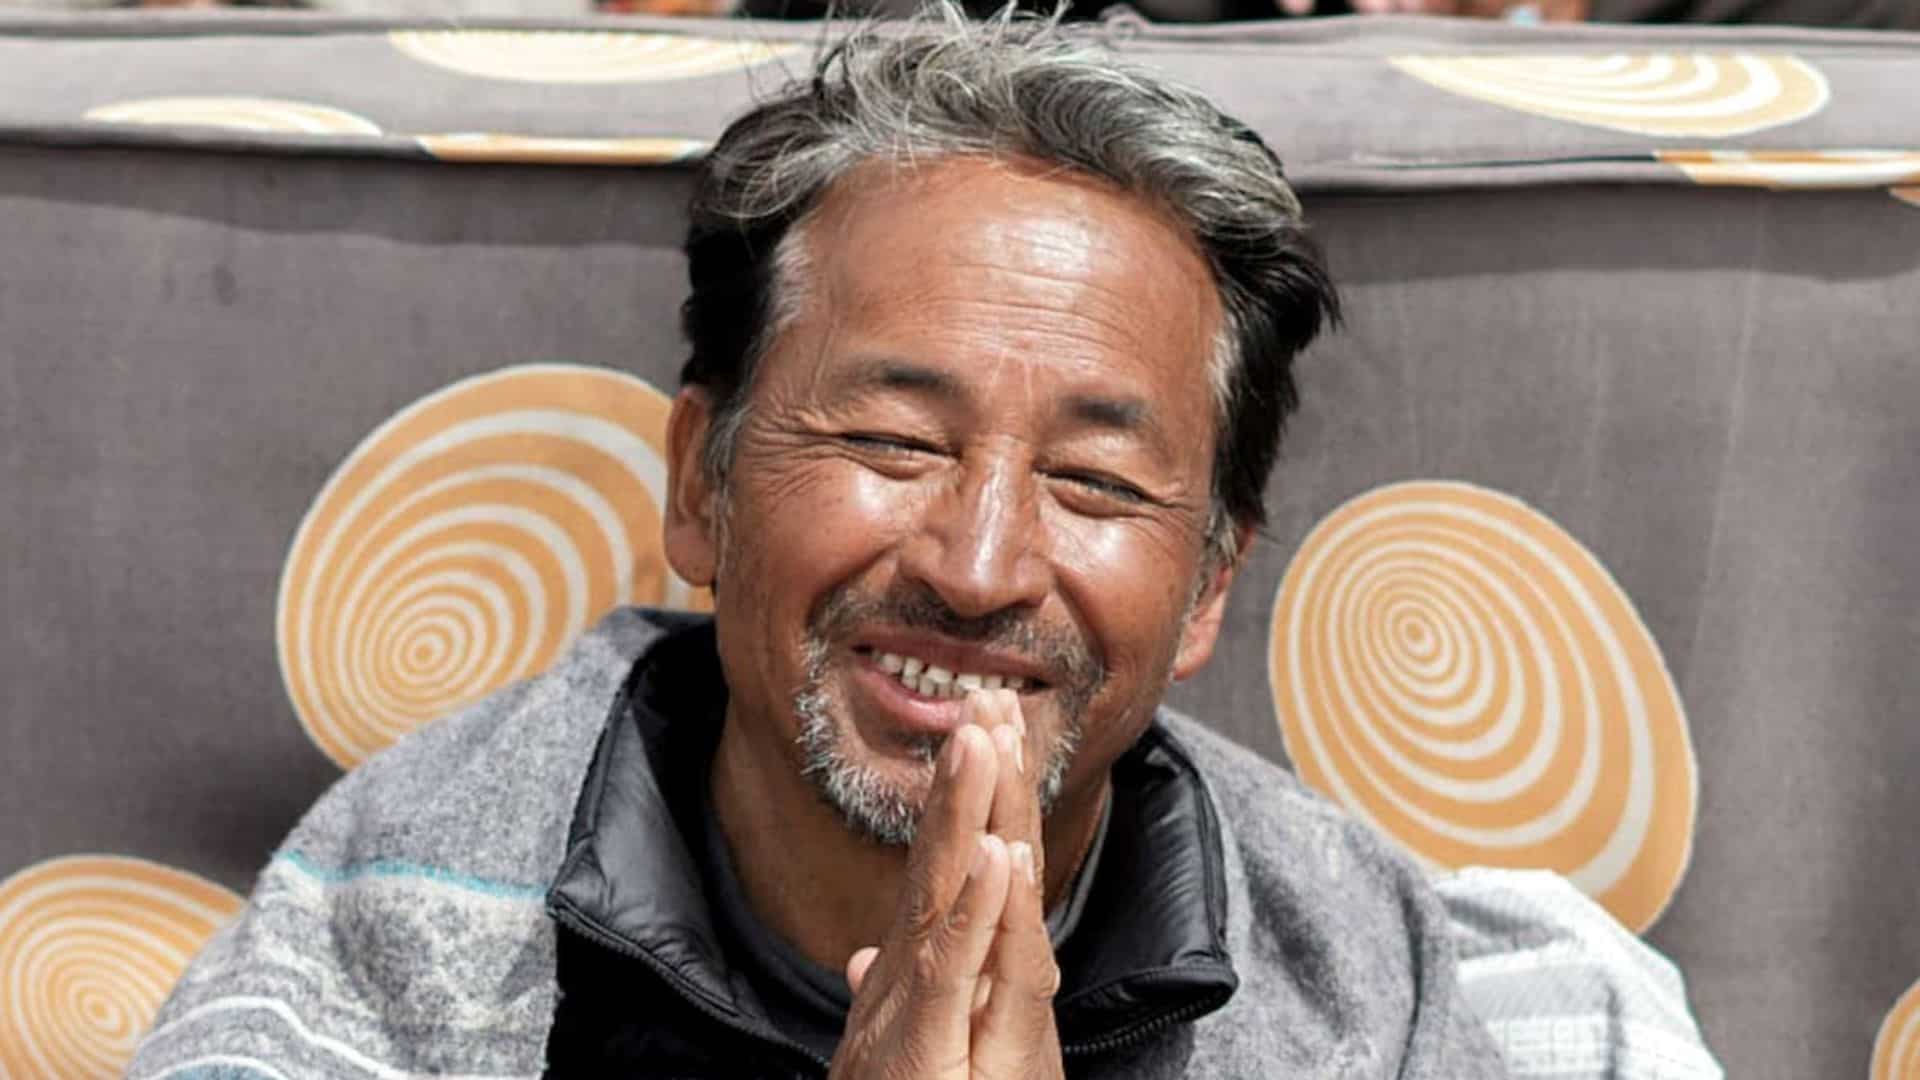 India: Climate activist, innovator Sonam Wangchuk ends 21-day hunger strike in Leh